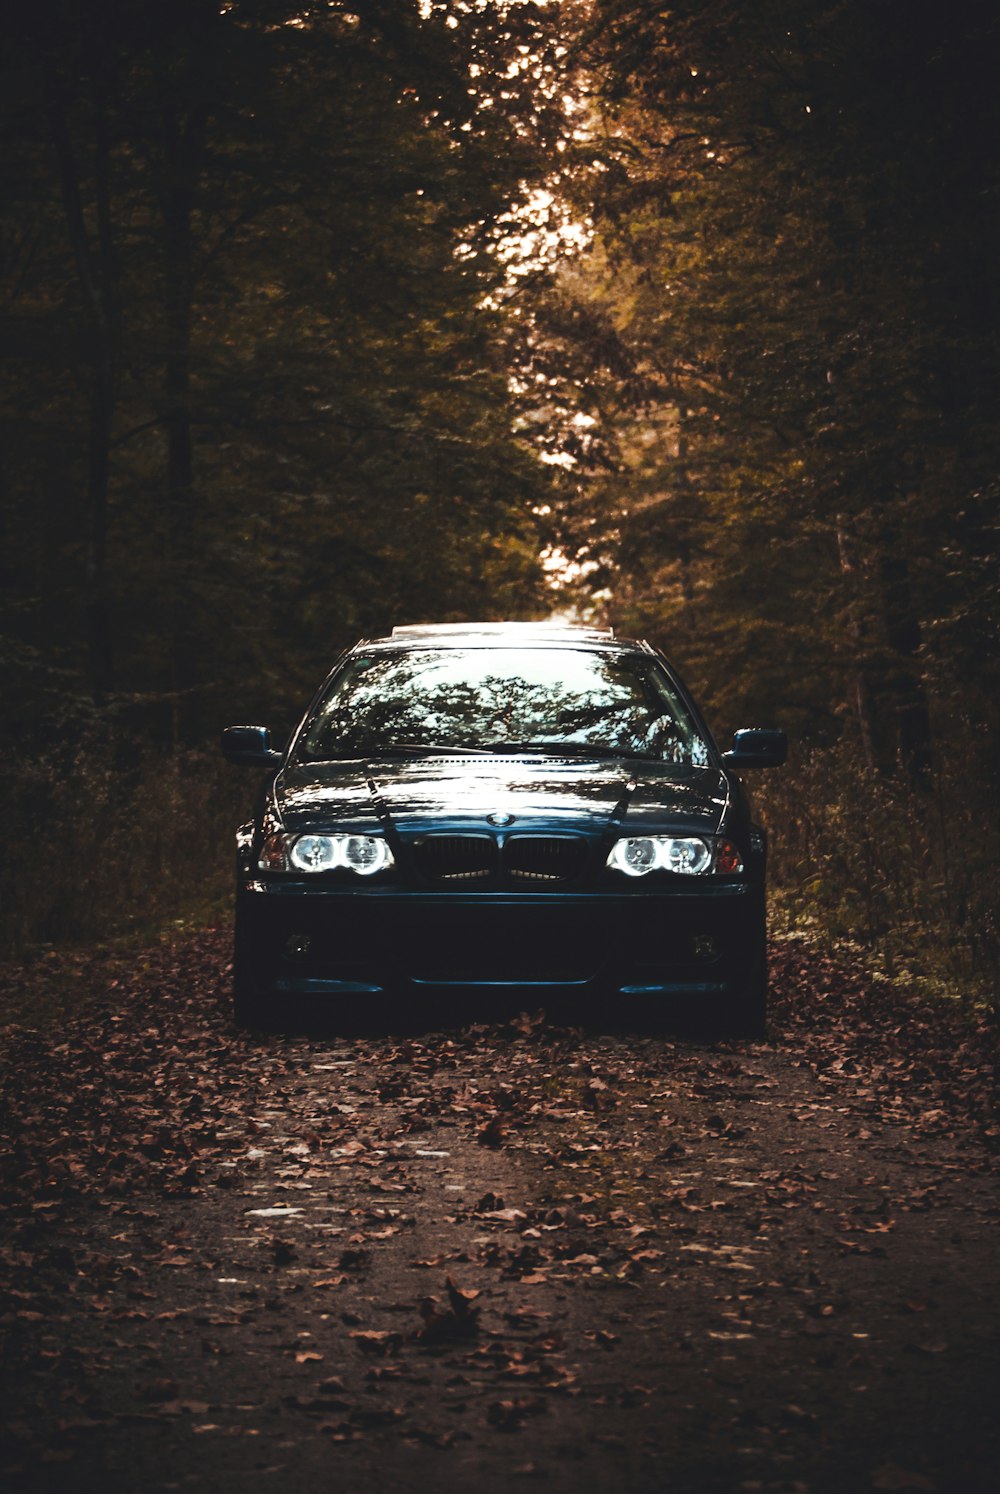 a car parked in the middle of a forest